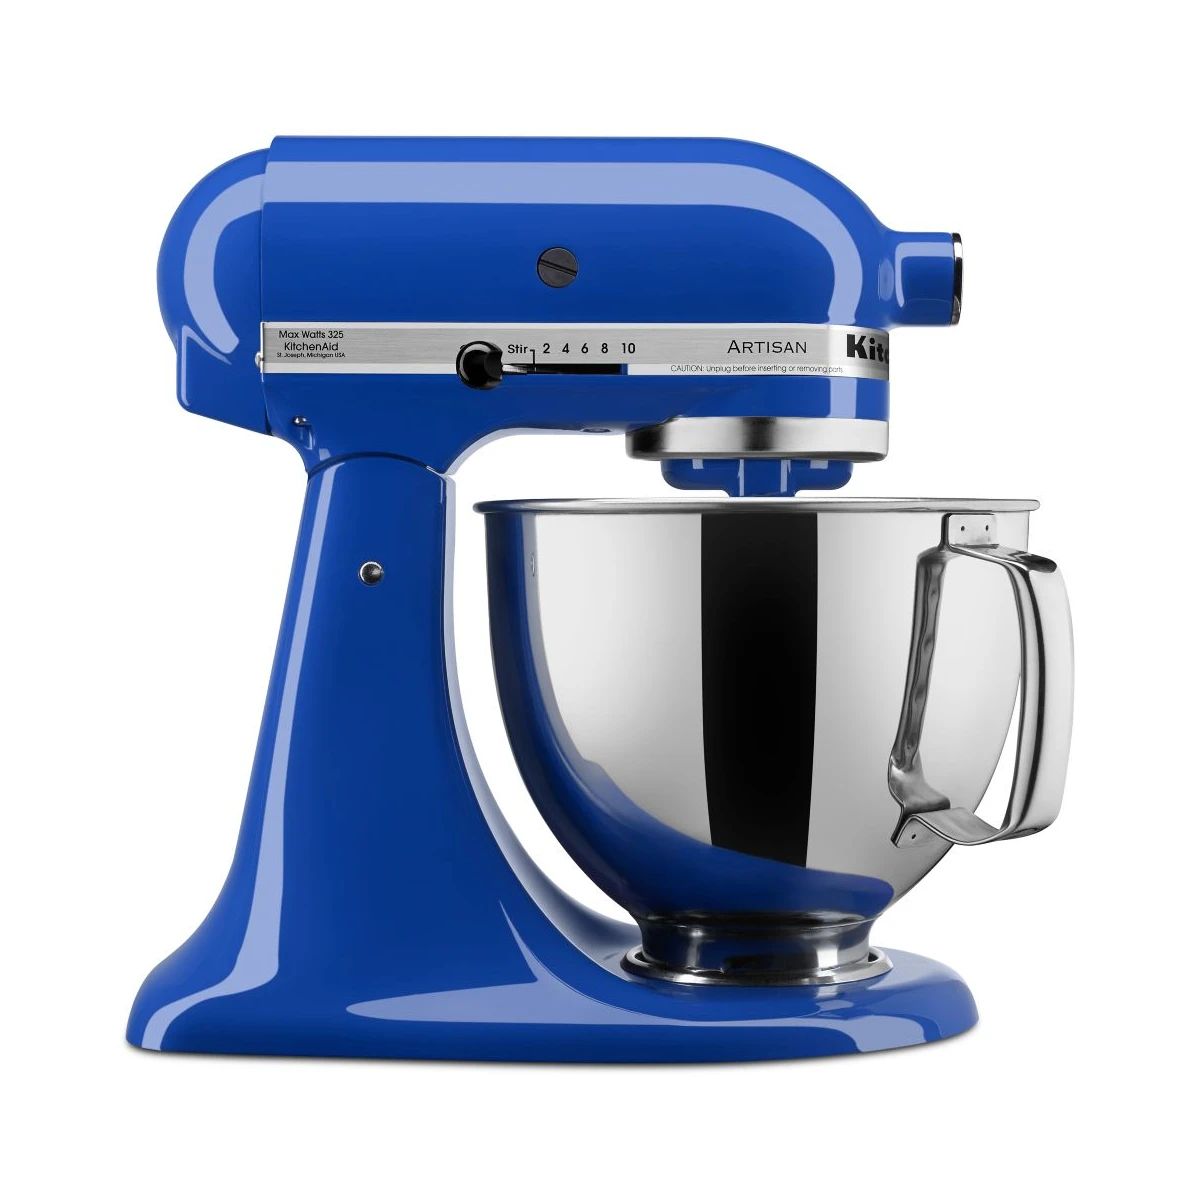 10 Speed 5 Qt. Stand Mixer with Direct Drive Transmission | Build.com, Inc.